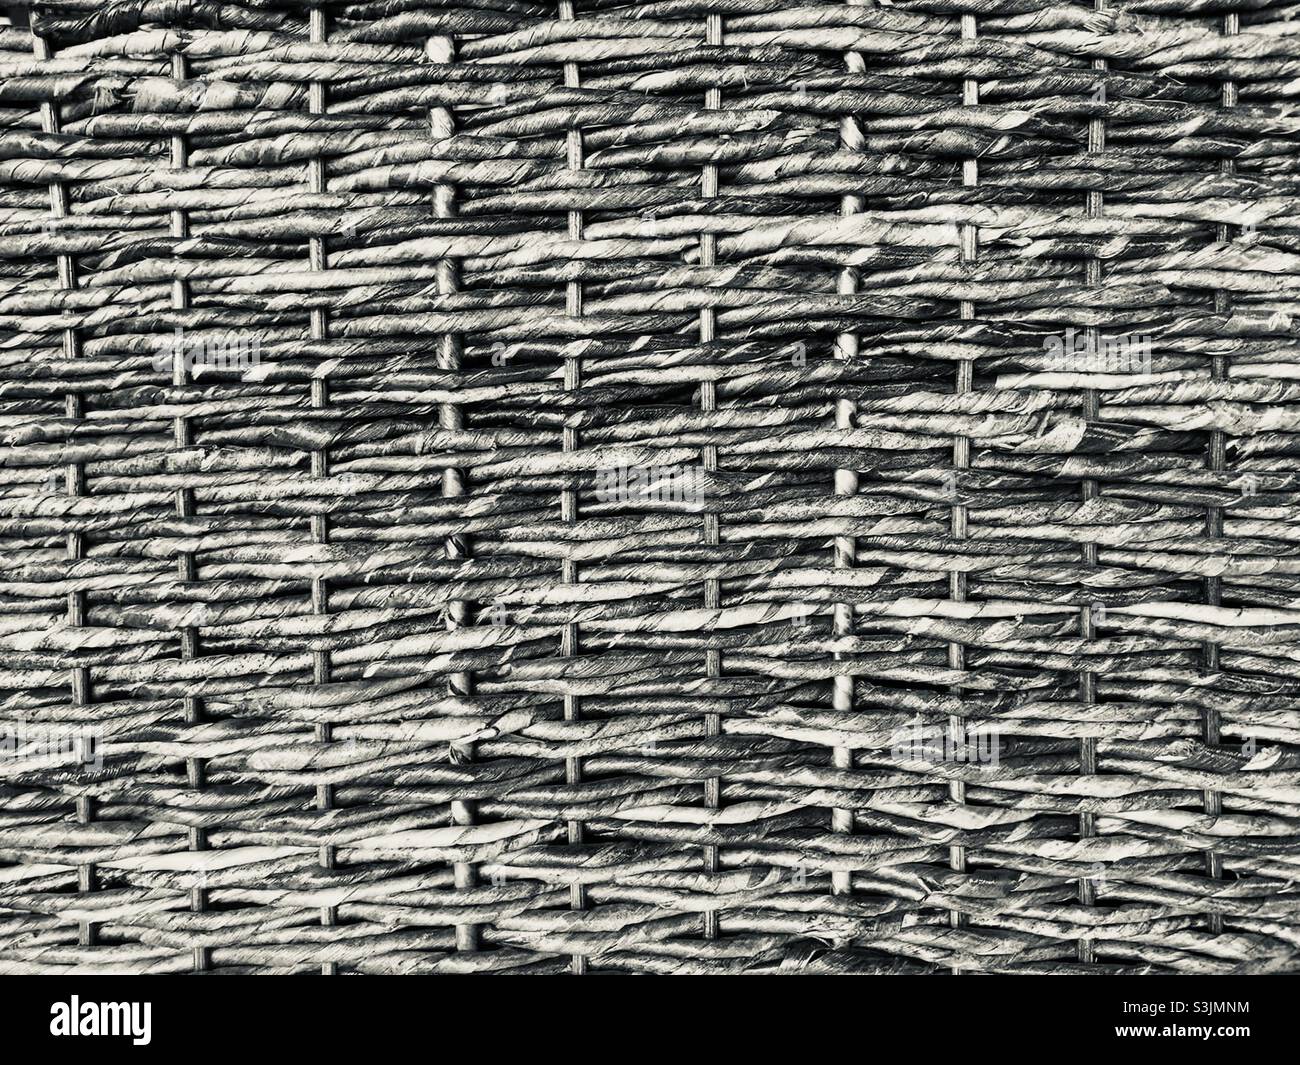 Textured wicker basket background black and white Stock Photo